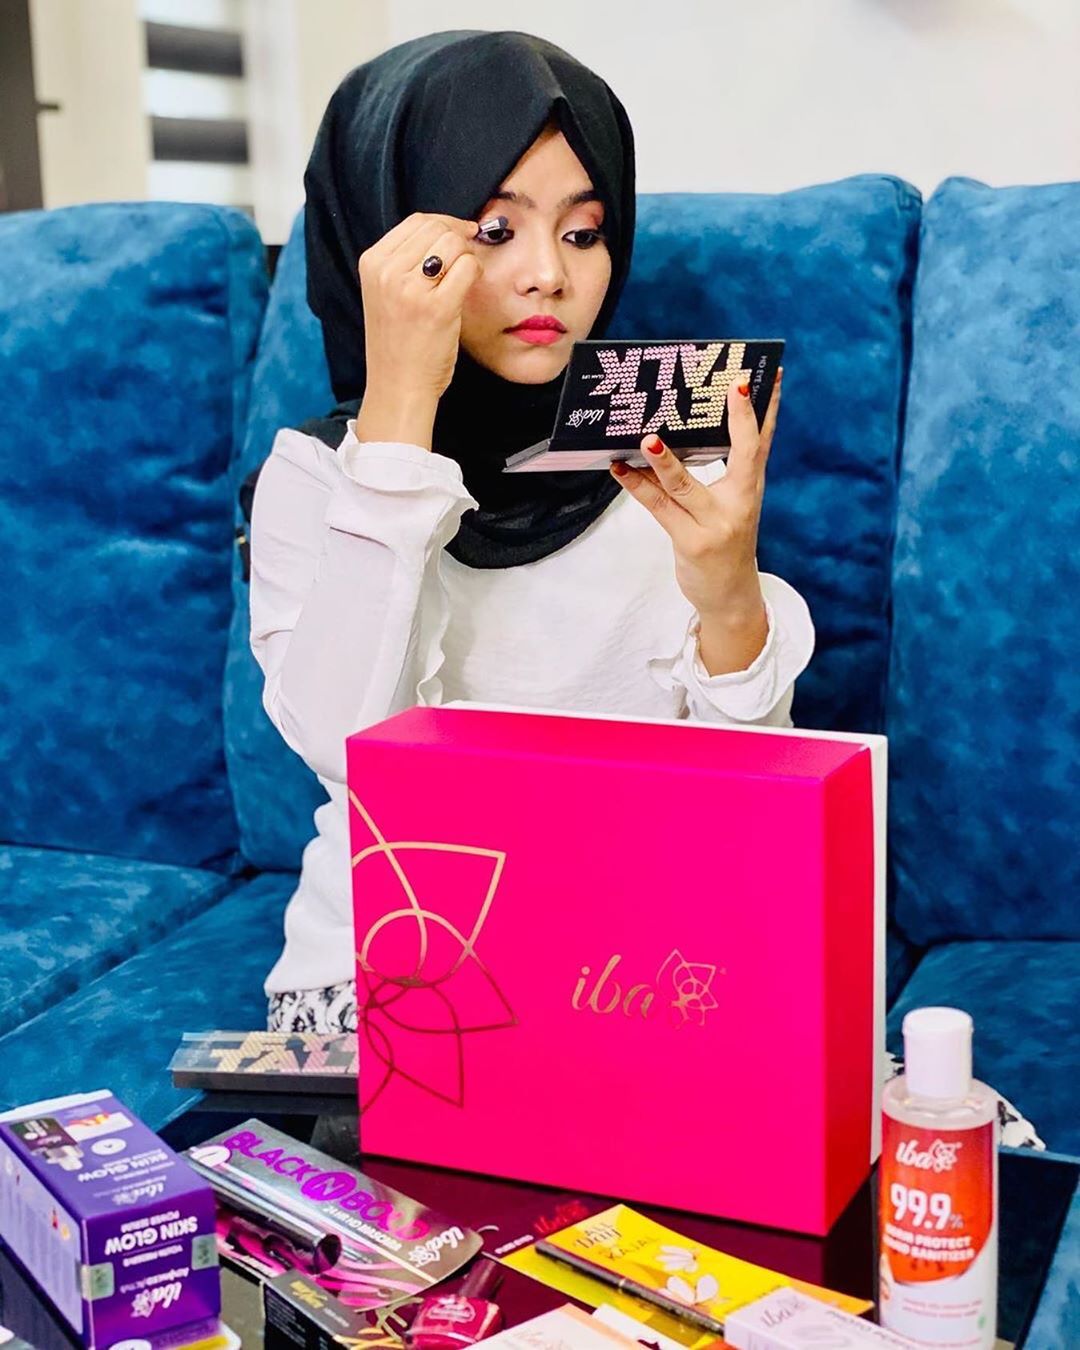 Iba - Guess who’s using & loving our Halal Certified & Vegan Makeup Box! @mashura_basheer thank you for this lovely photo 💖

Get your own Makeup Box with 13 products curated based on skin tone - Dusky...